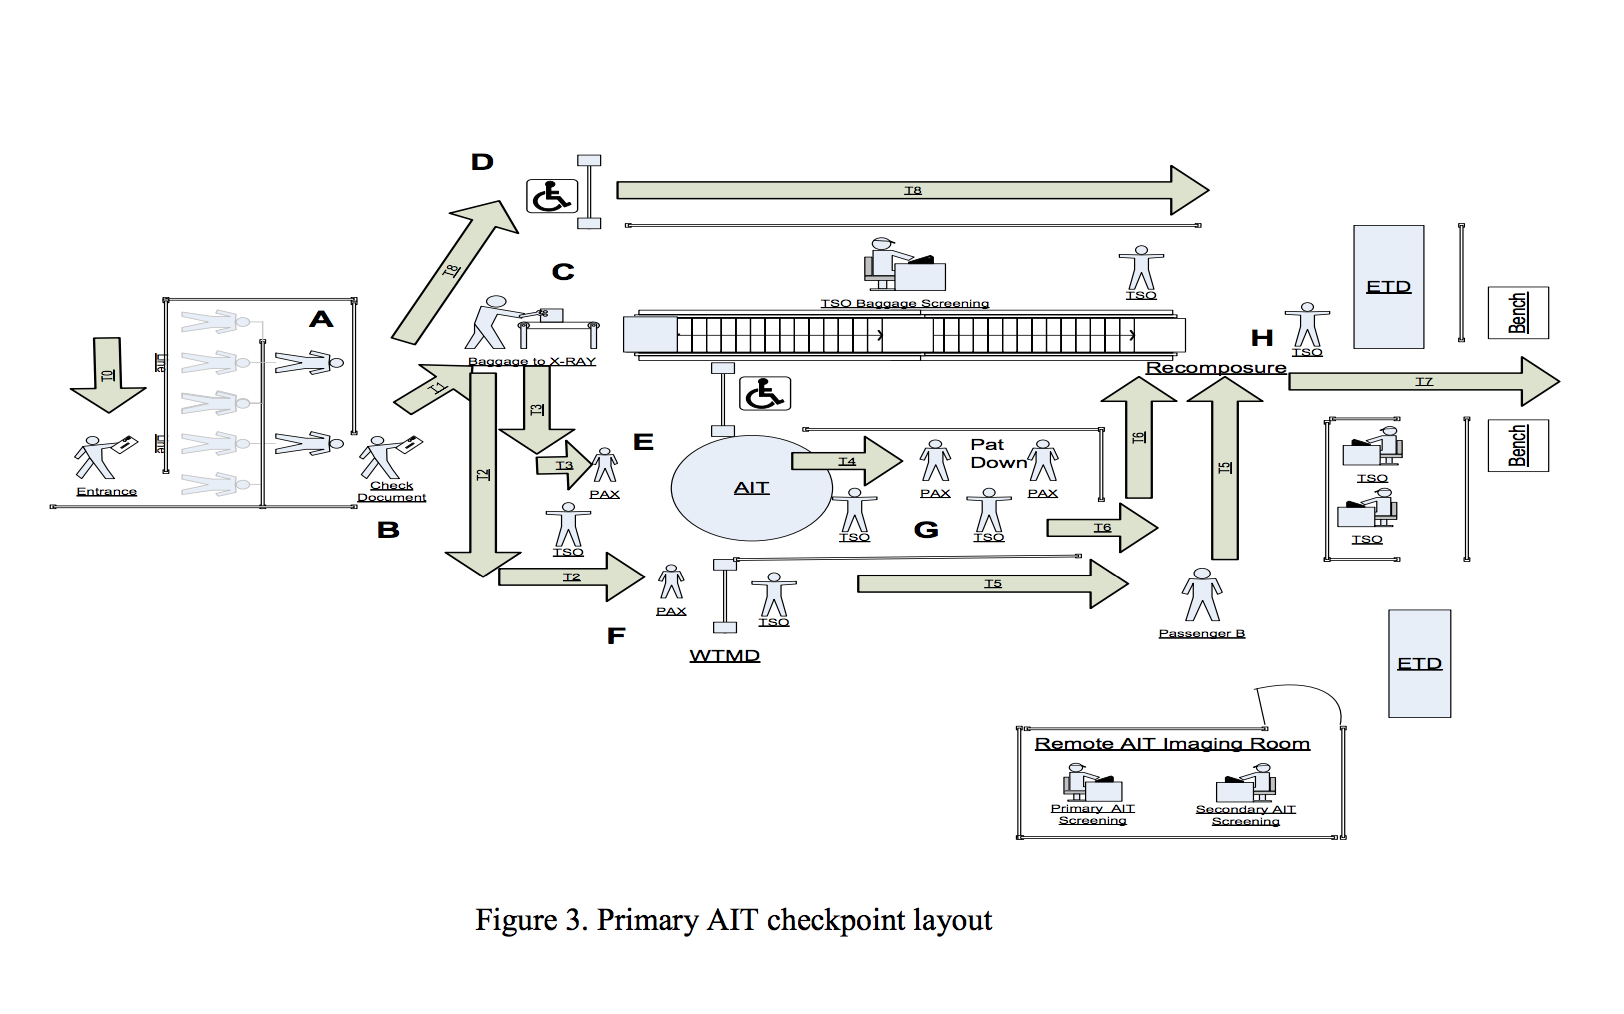 Human Factors Design-Specification Process for the Integrated Checkpoint Program